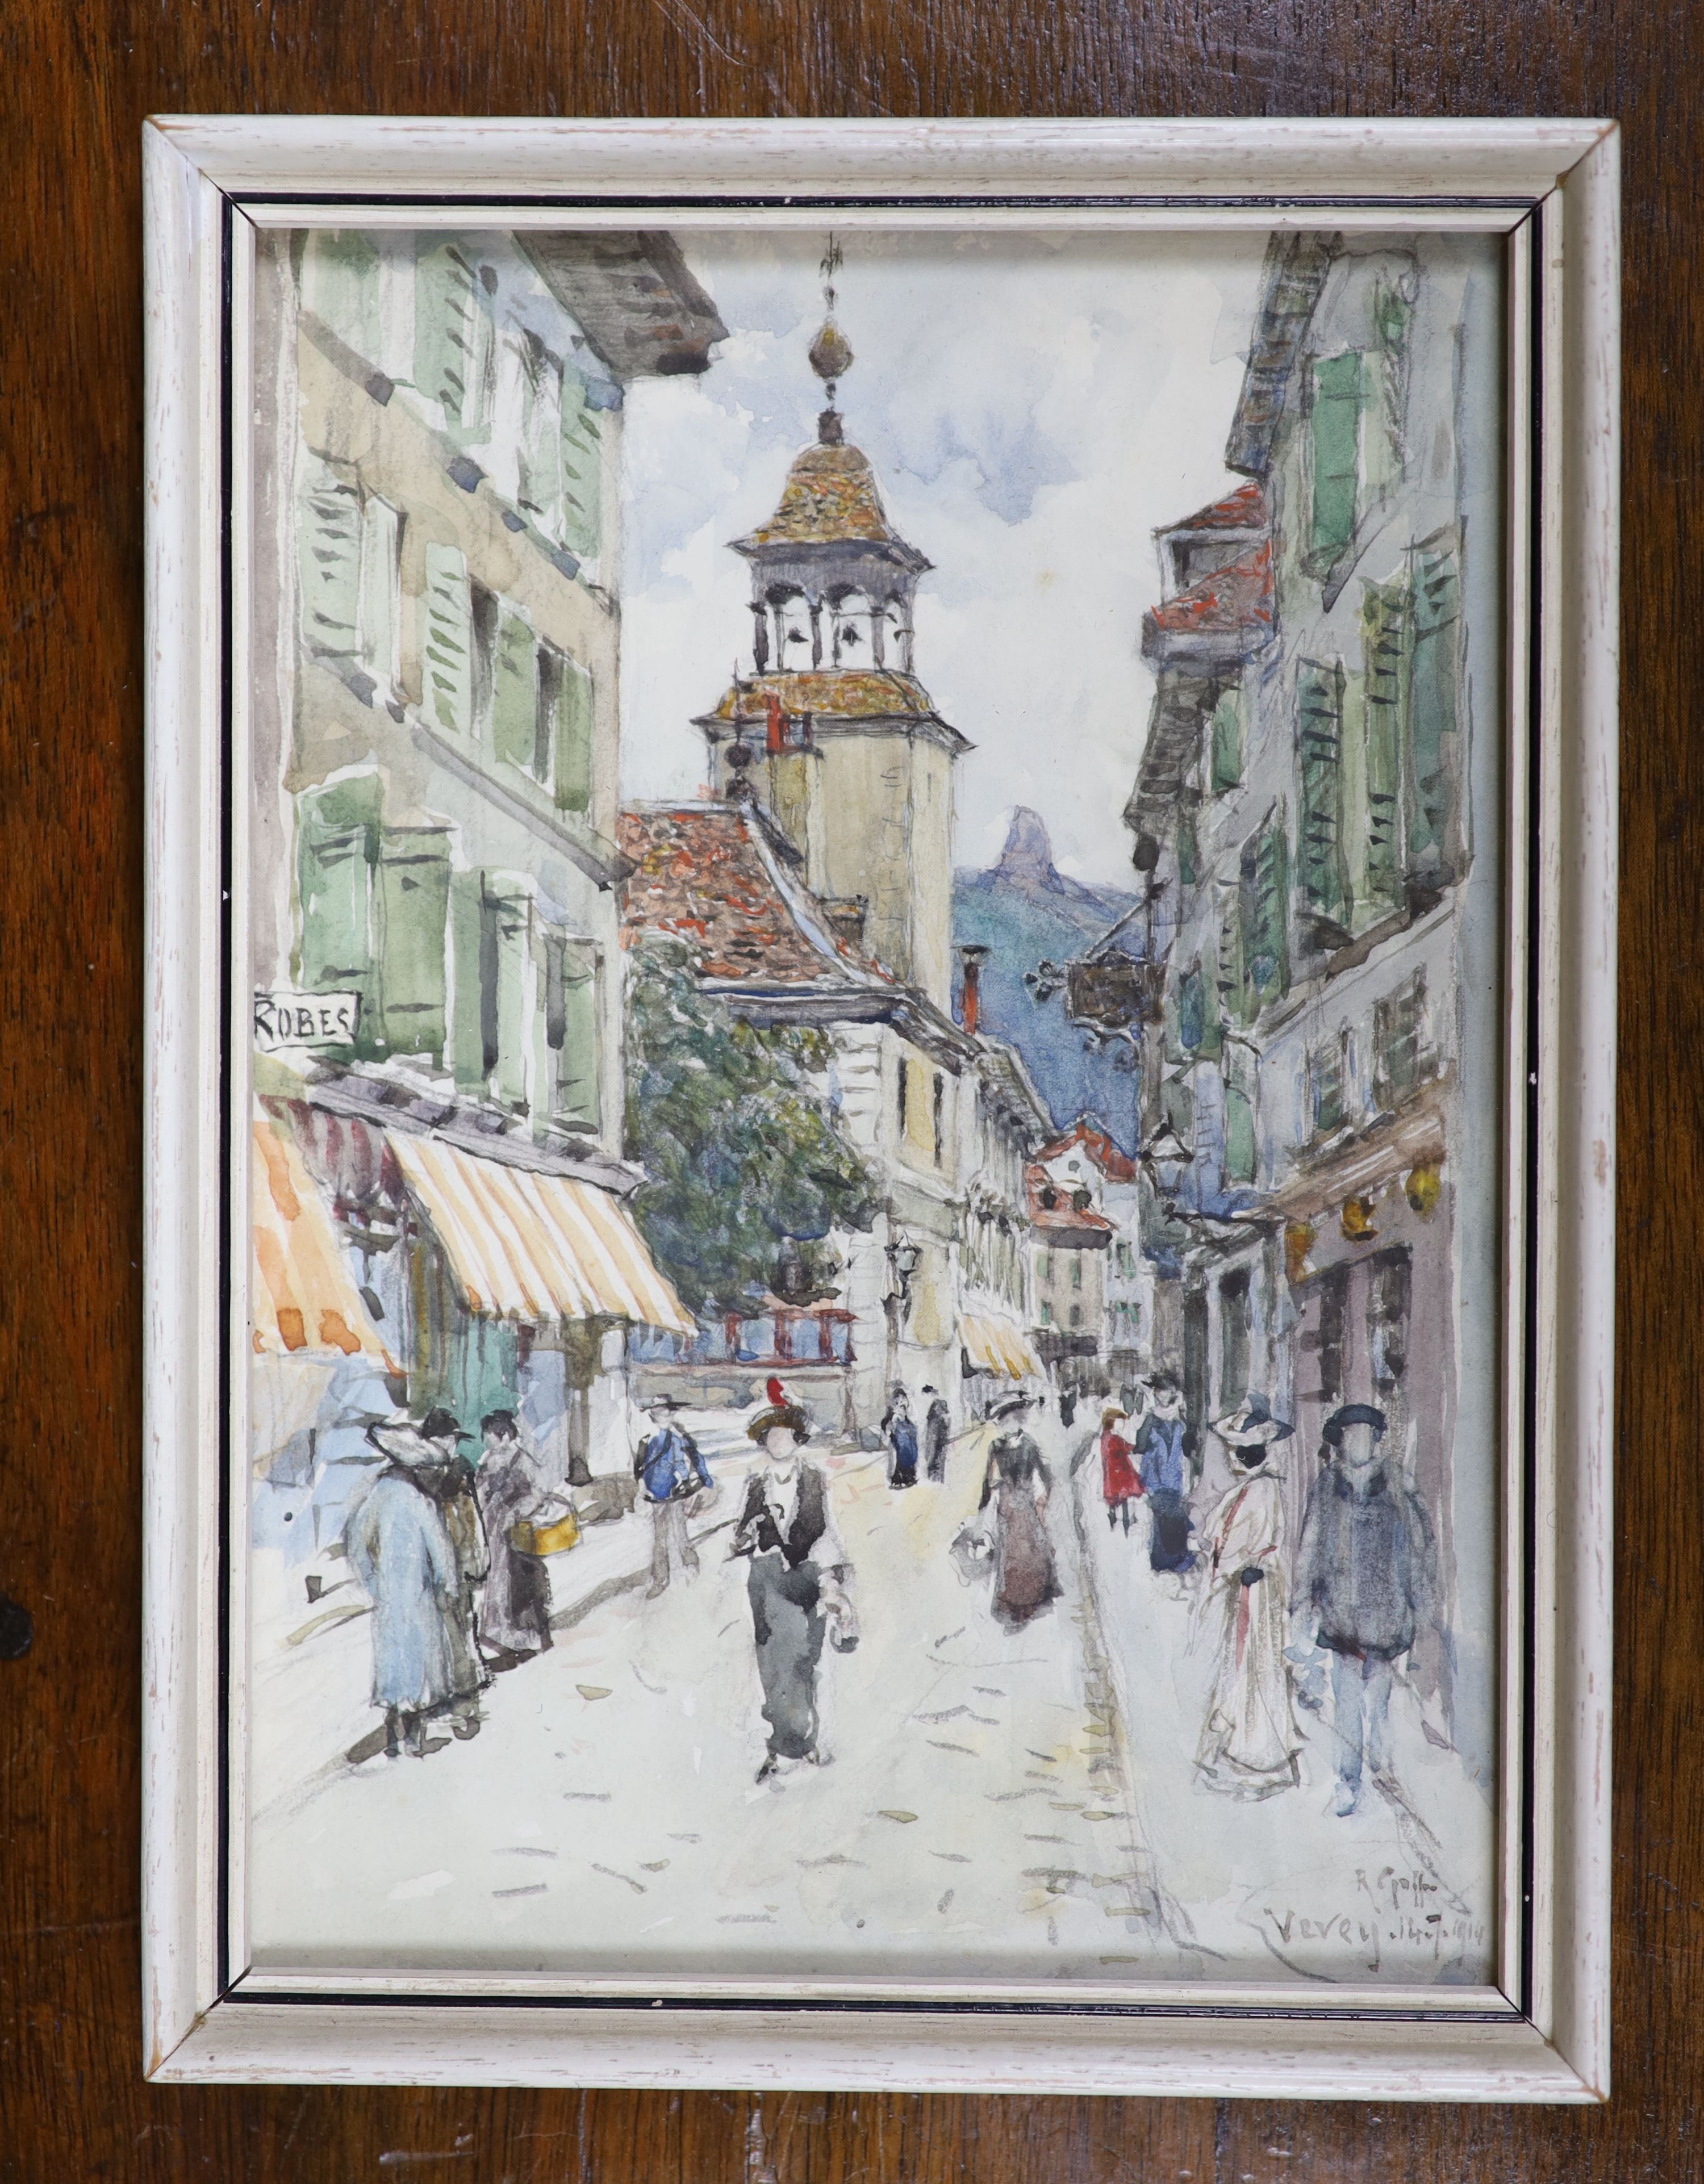 Robert Goff (1837-1922), watercolour, Vevey, signed and dated 1914, 18 x 12.5cm. - Image 2 of 3